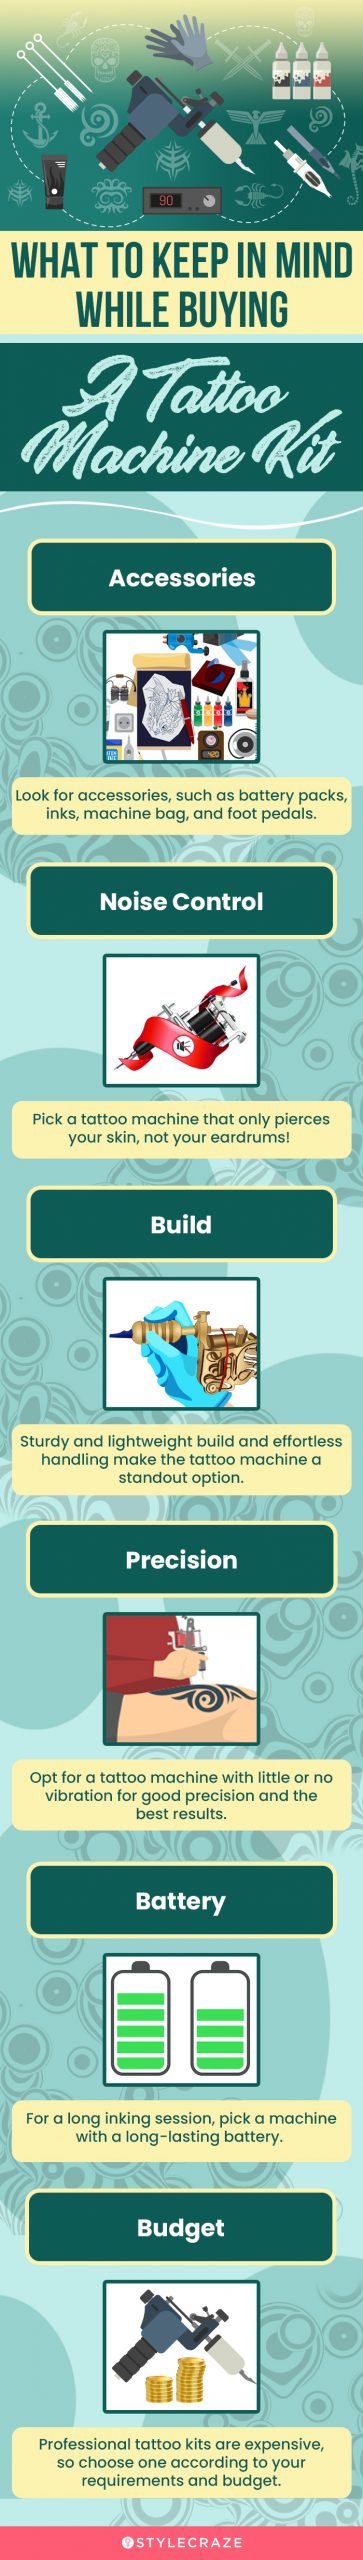 What To Keep In Mind While Buying A Tattoo Machine Kit (infographic)